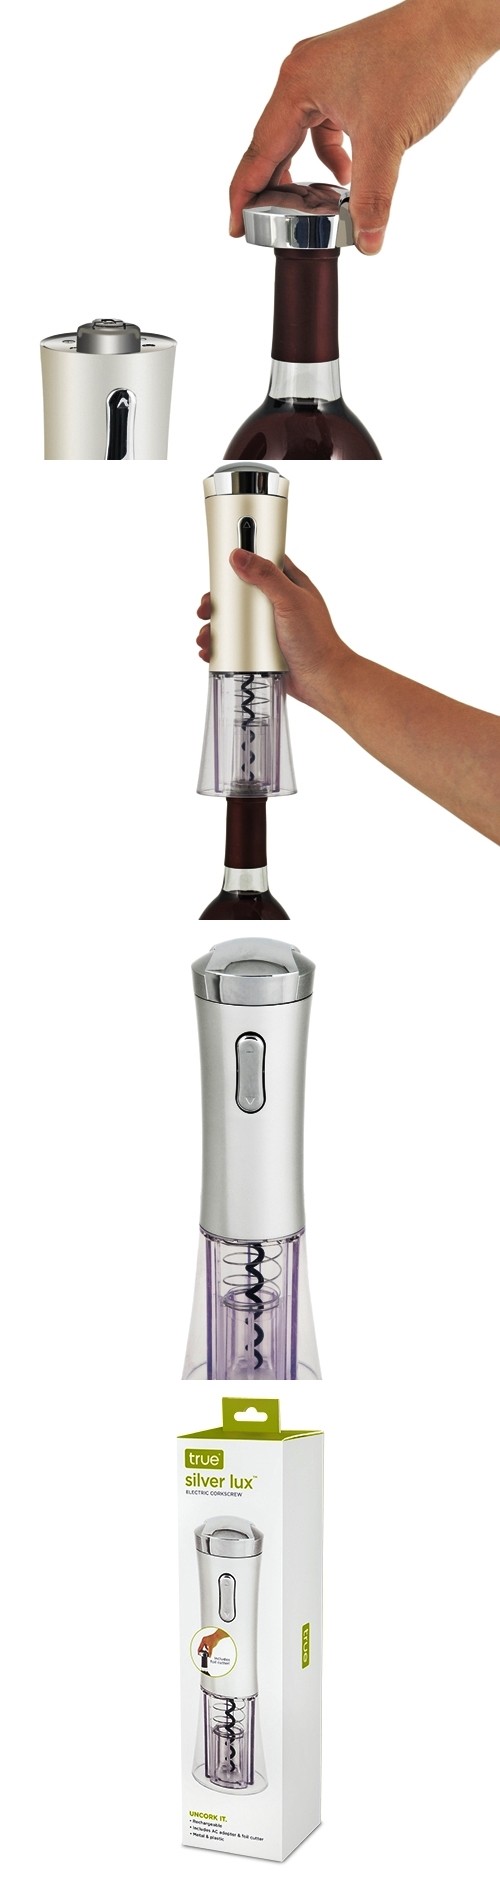 Silver Lux Rechargeable Electric Corkscrew with Foil Cutter by True